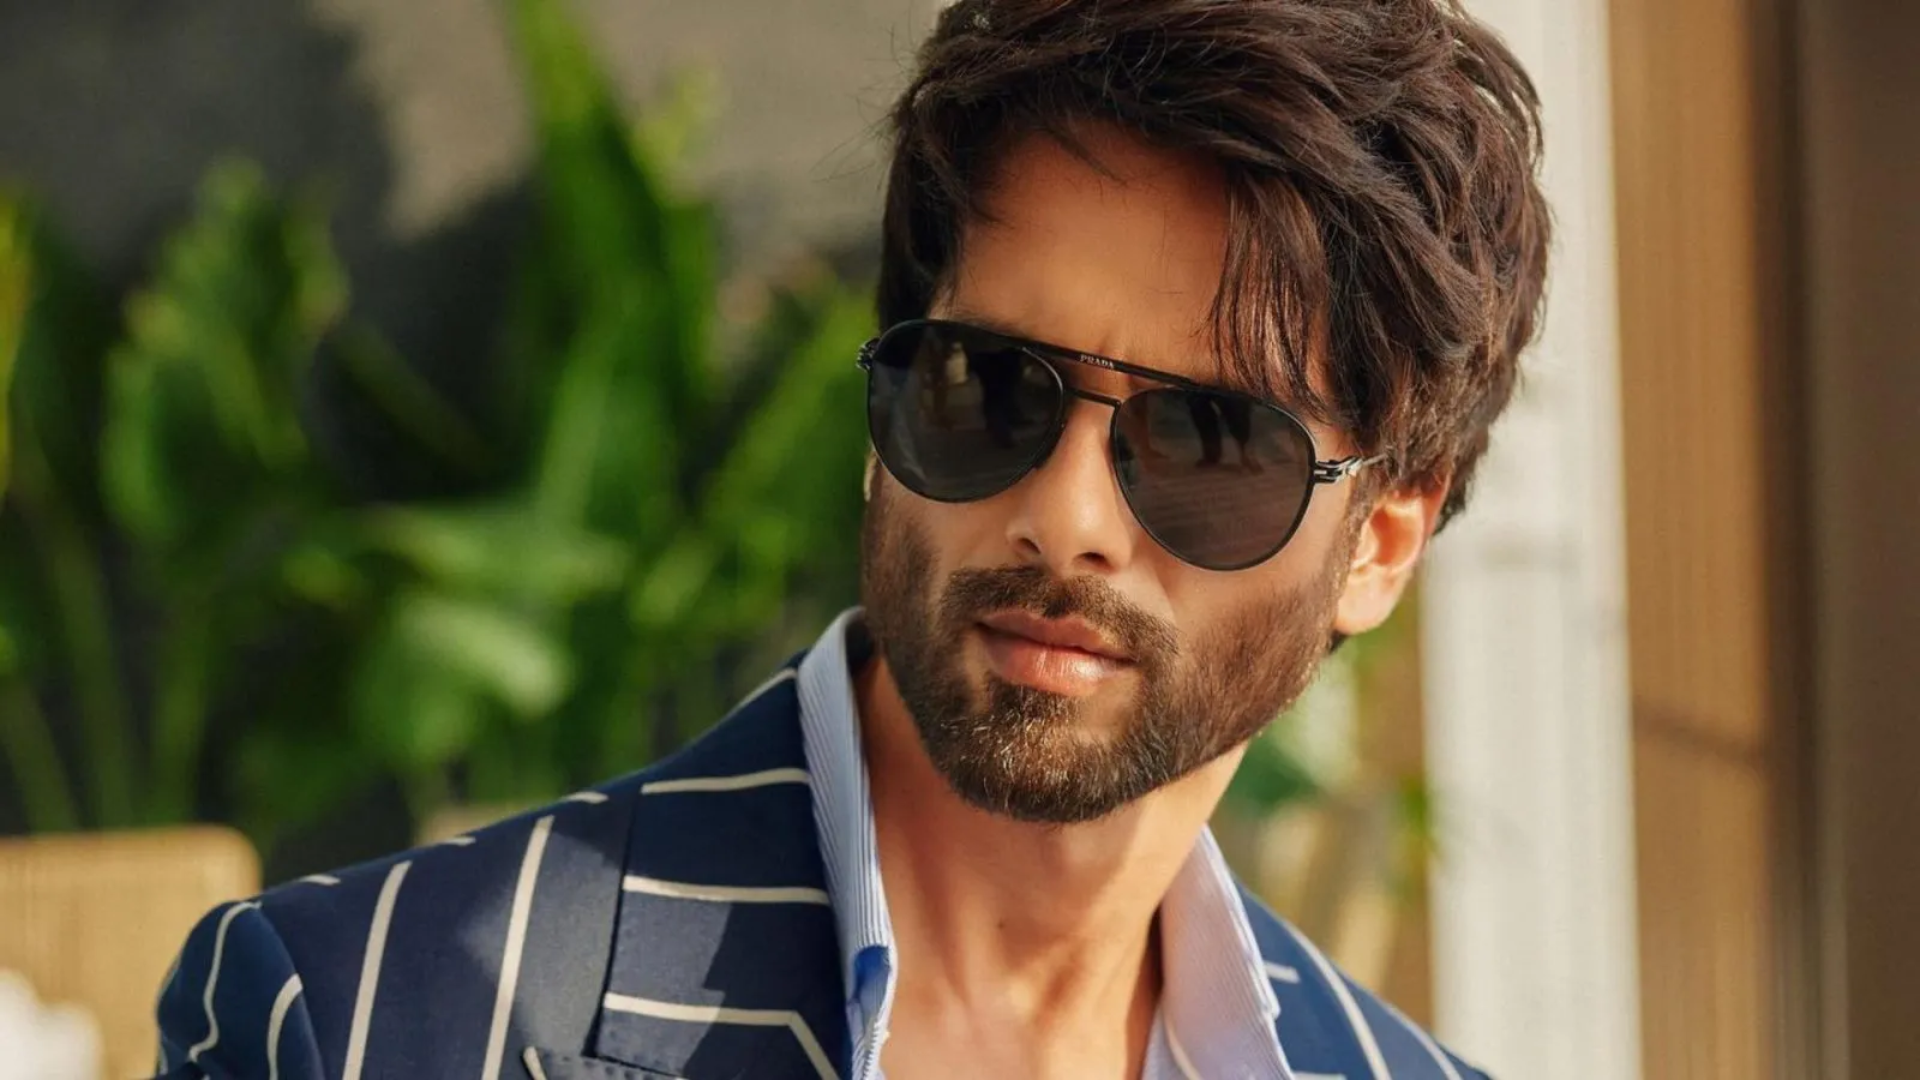 Shahid Kapoor Net Worth Hits Rs 300 Crore, Earning Rs 3 Crore Monthly From Movies, Brand Endorsements